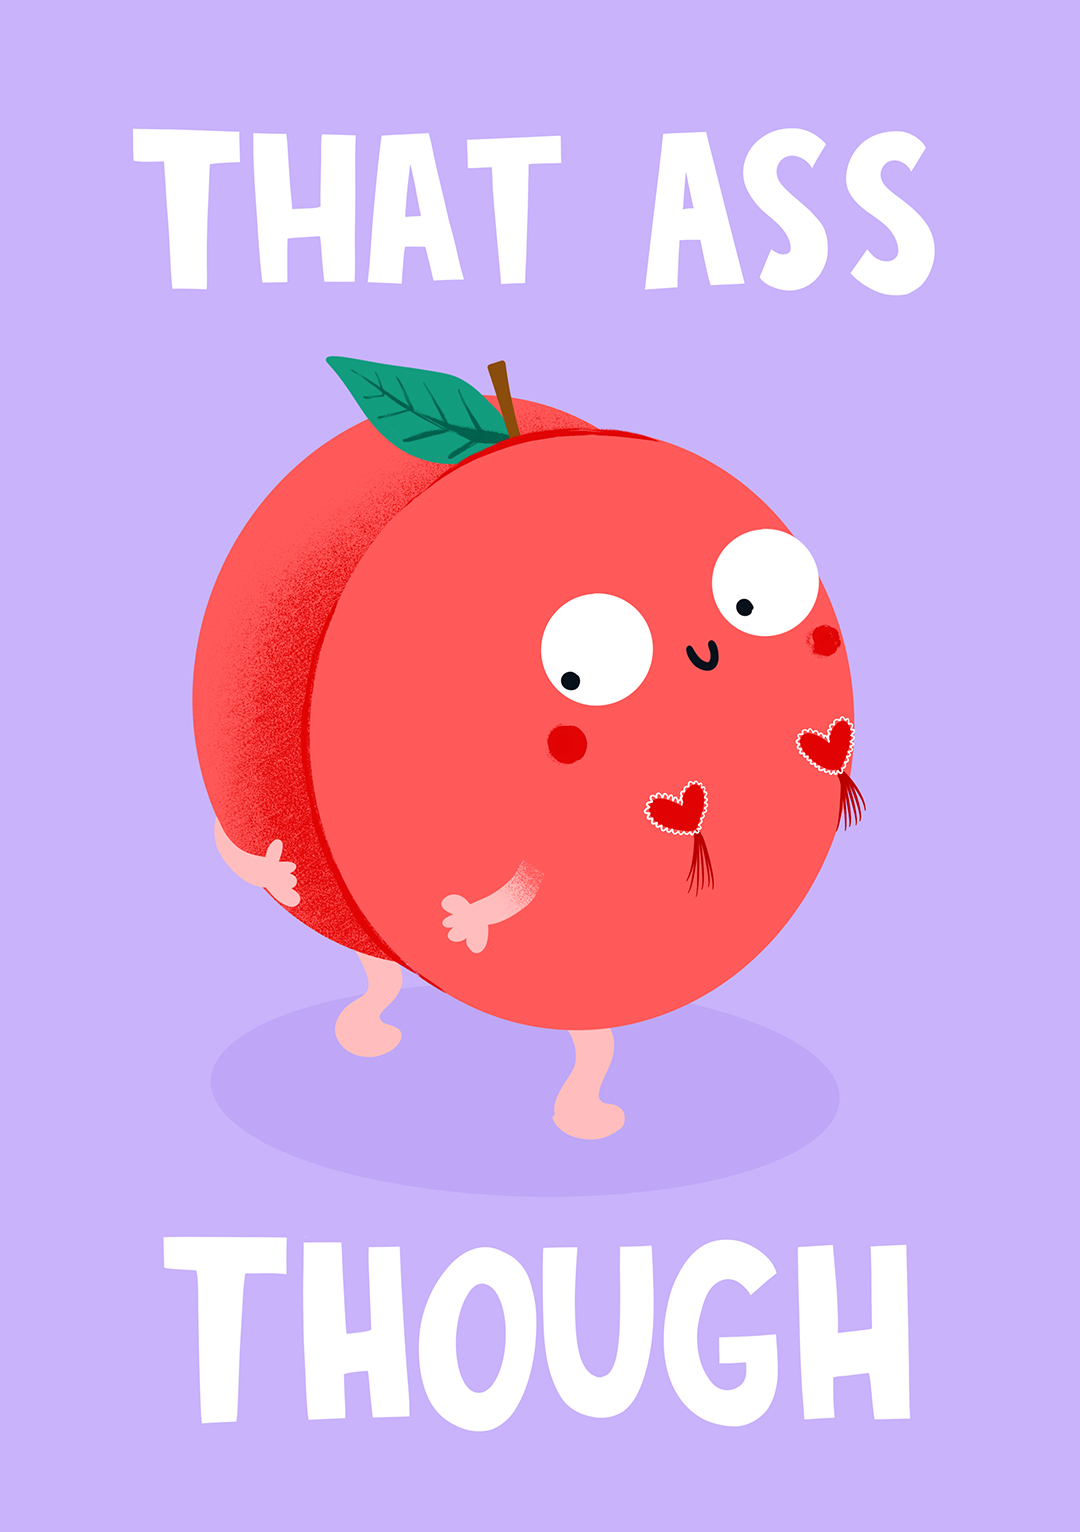 That Ass Though - Funny Peach Valentine's Day Card